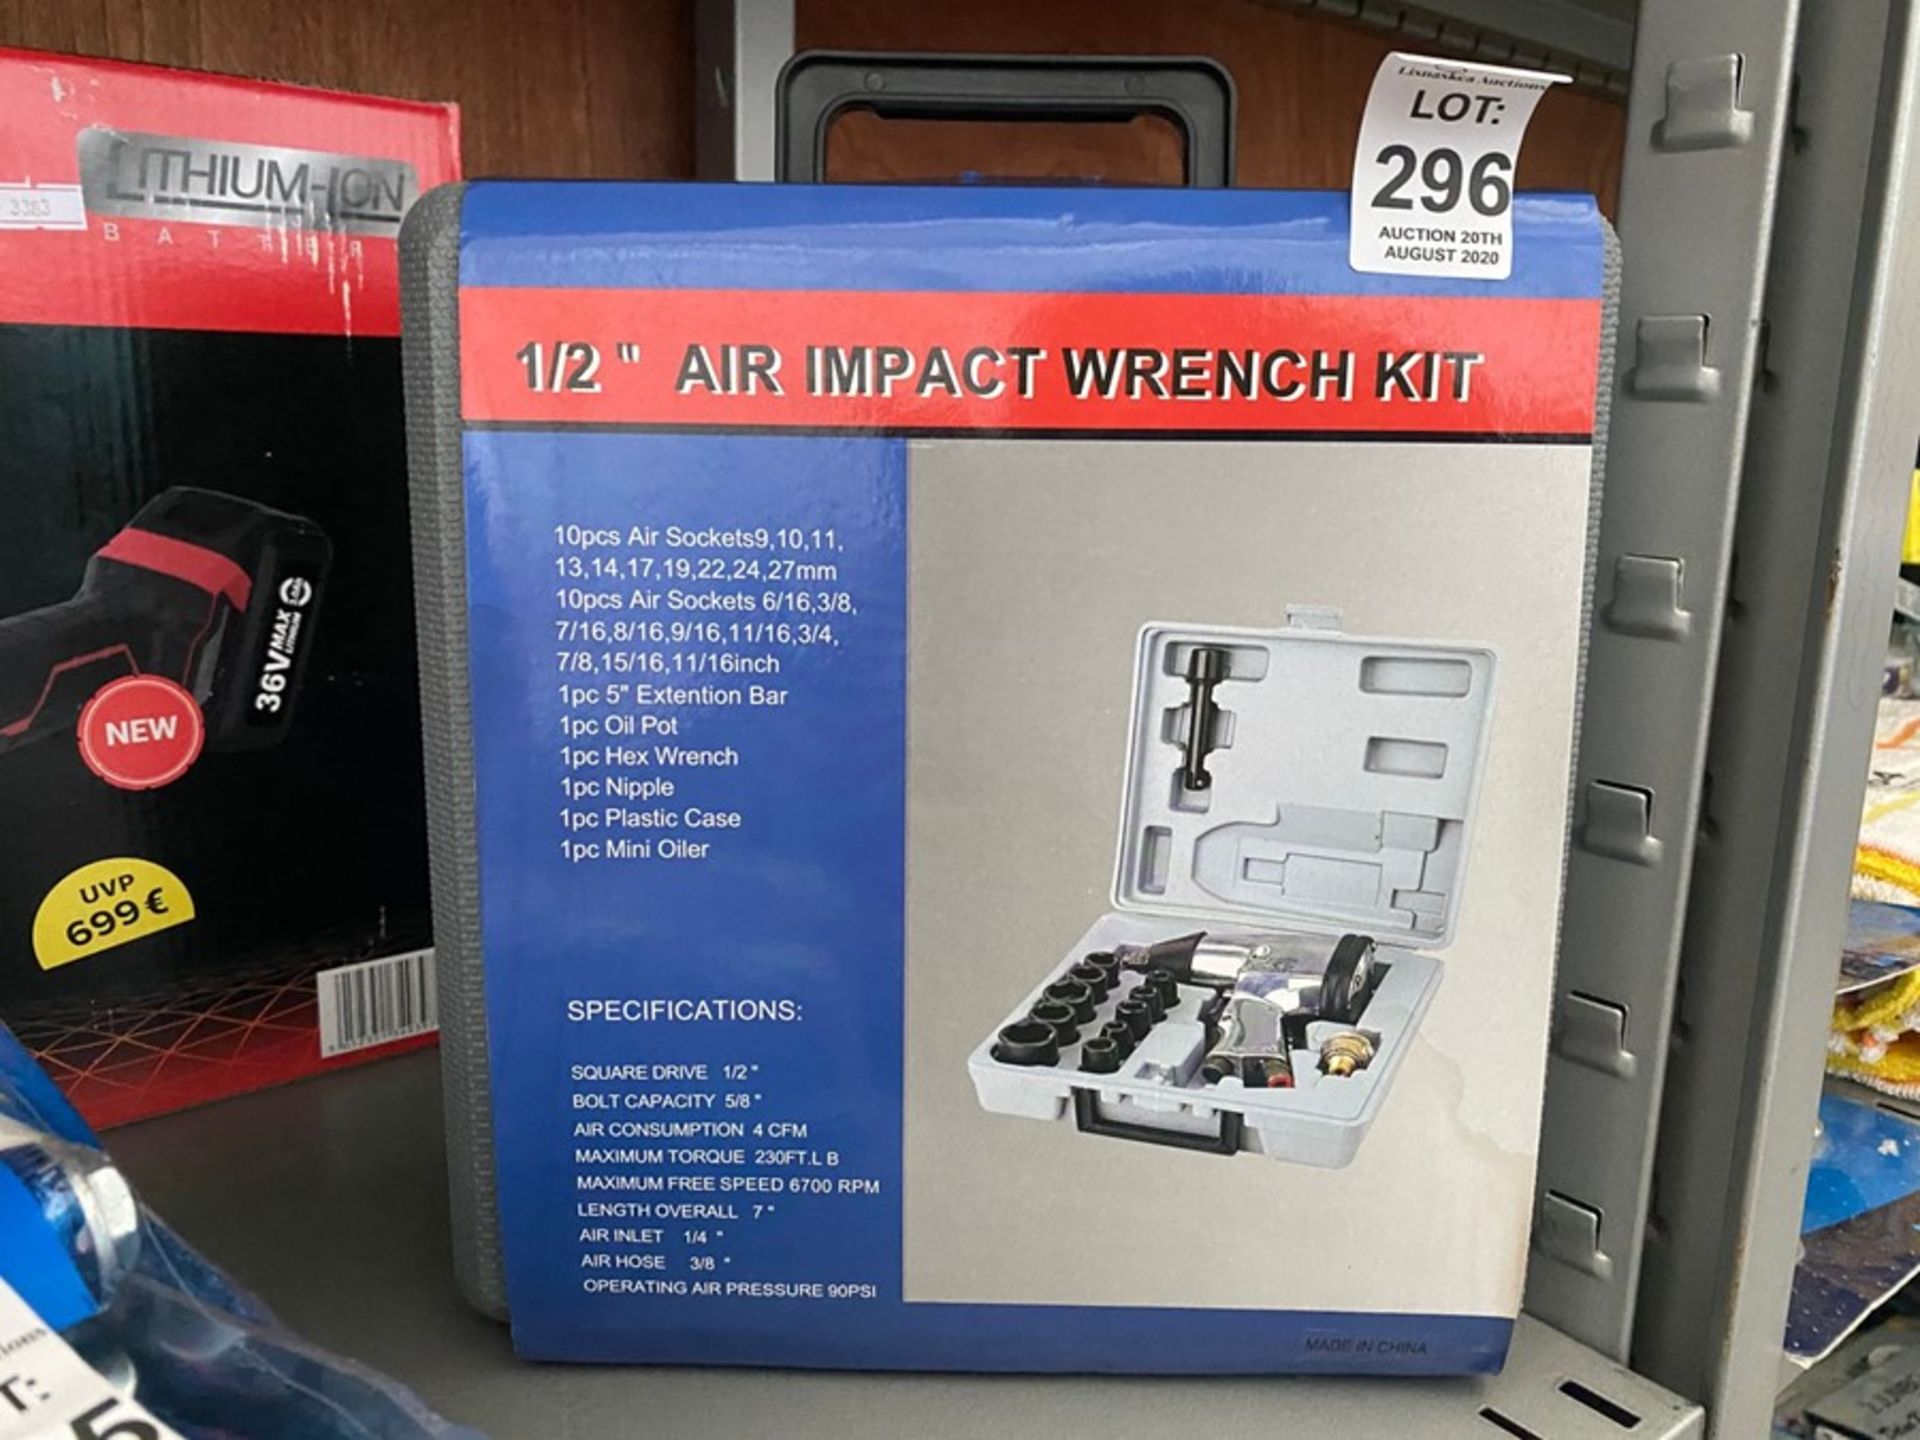 NEW 12" AIR IMPACT WRENCH KIT